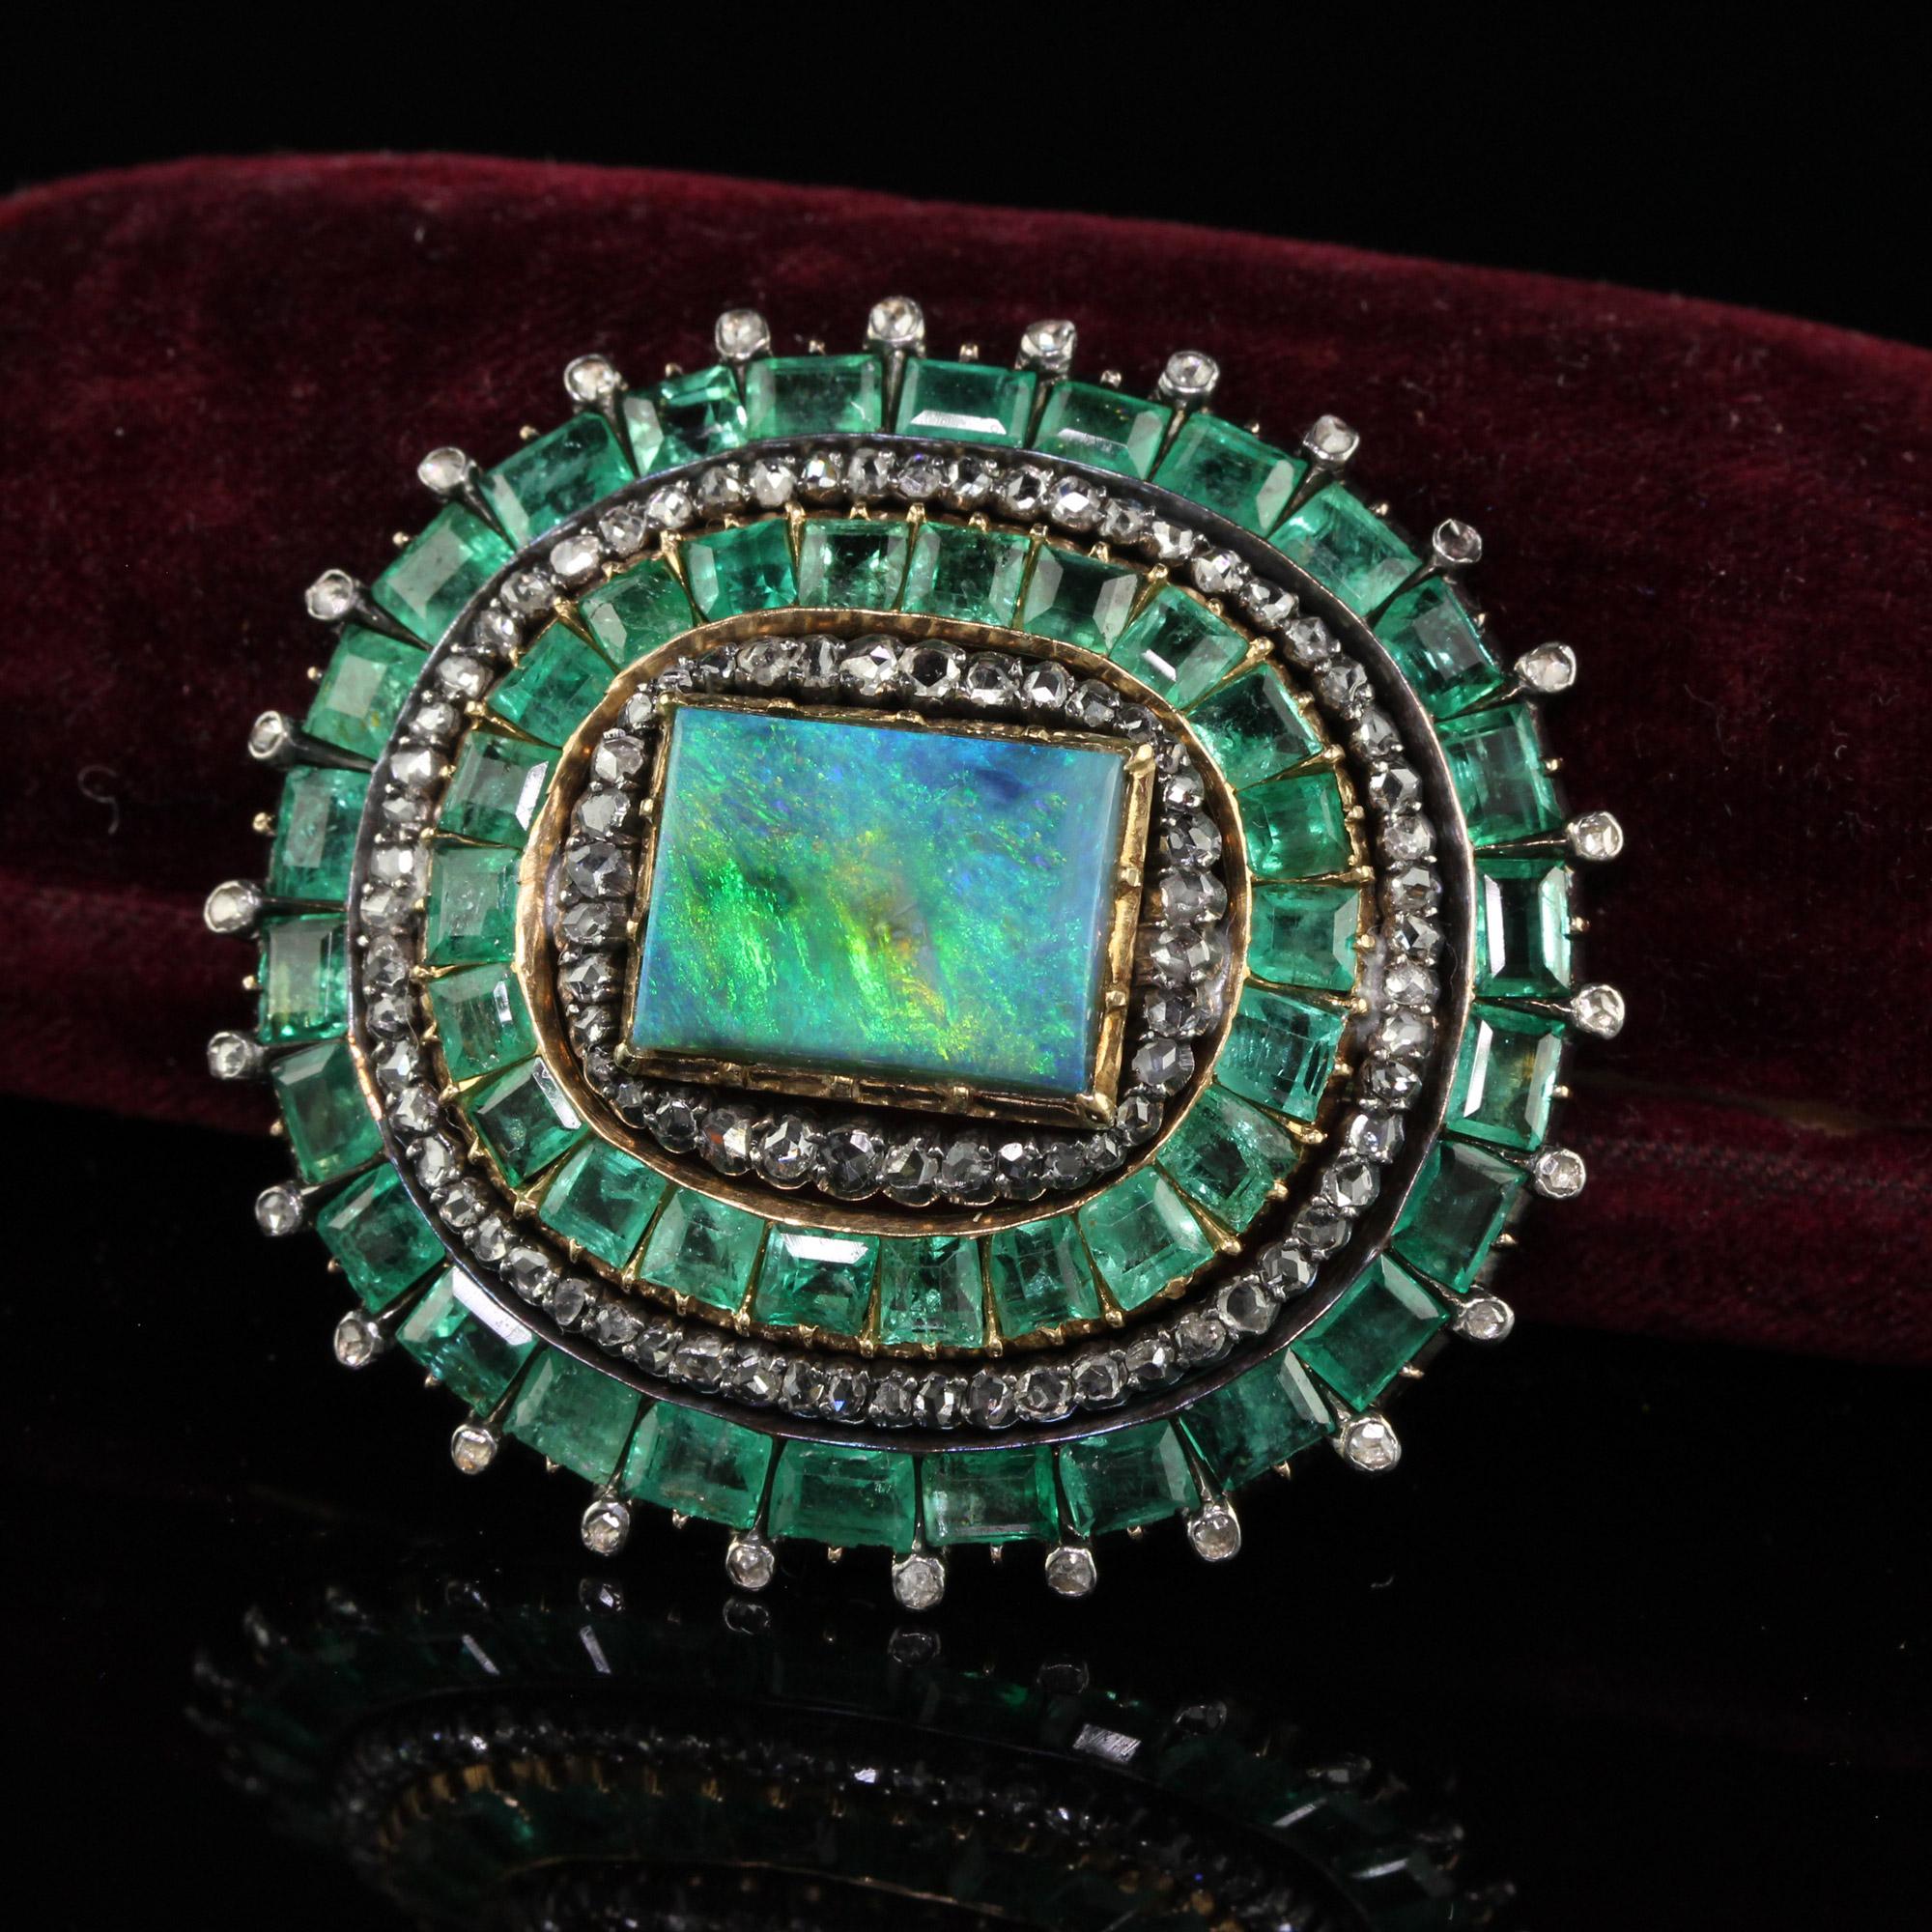 Beautiful Antique Victorian 18K Yellow Gold Silver Old Cut Diamond Emerald Black Opal Pin. This amazing early Victorian pin is crafted in 18k yellow gold and silver. This pin features two gorgeous rows of natural square antique cut emeralds and